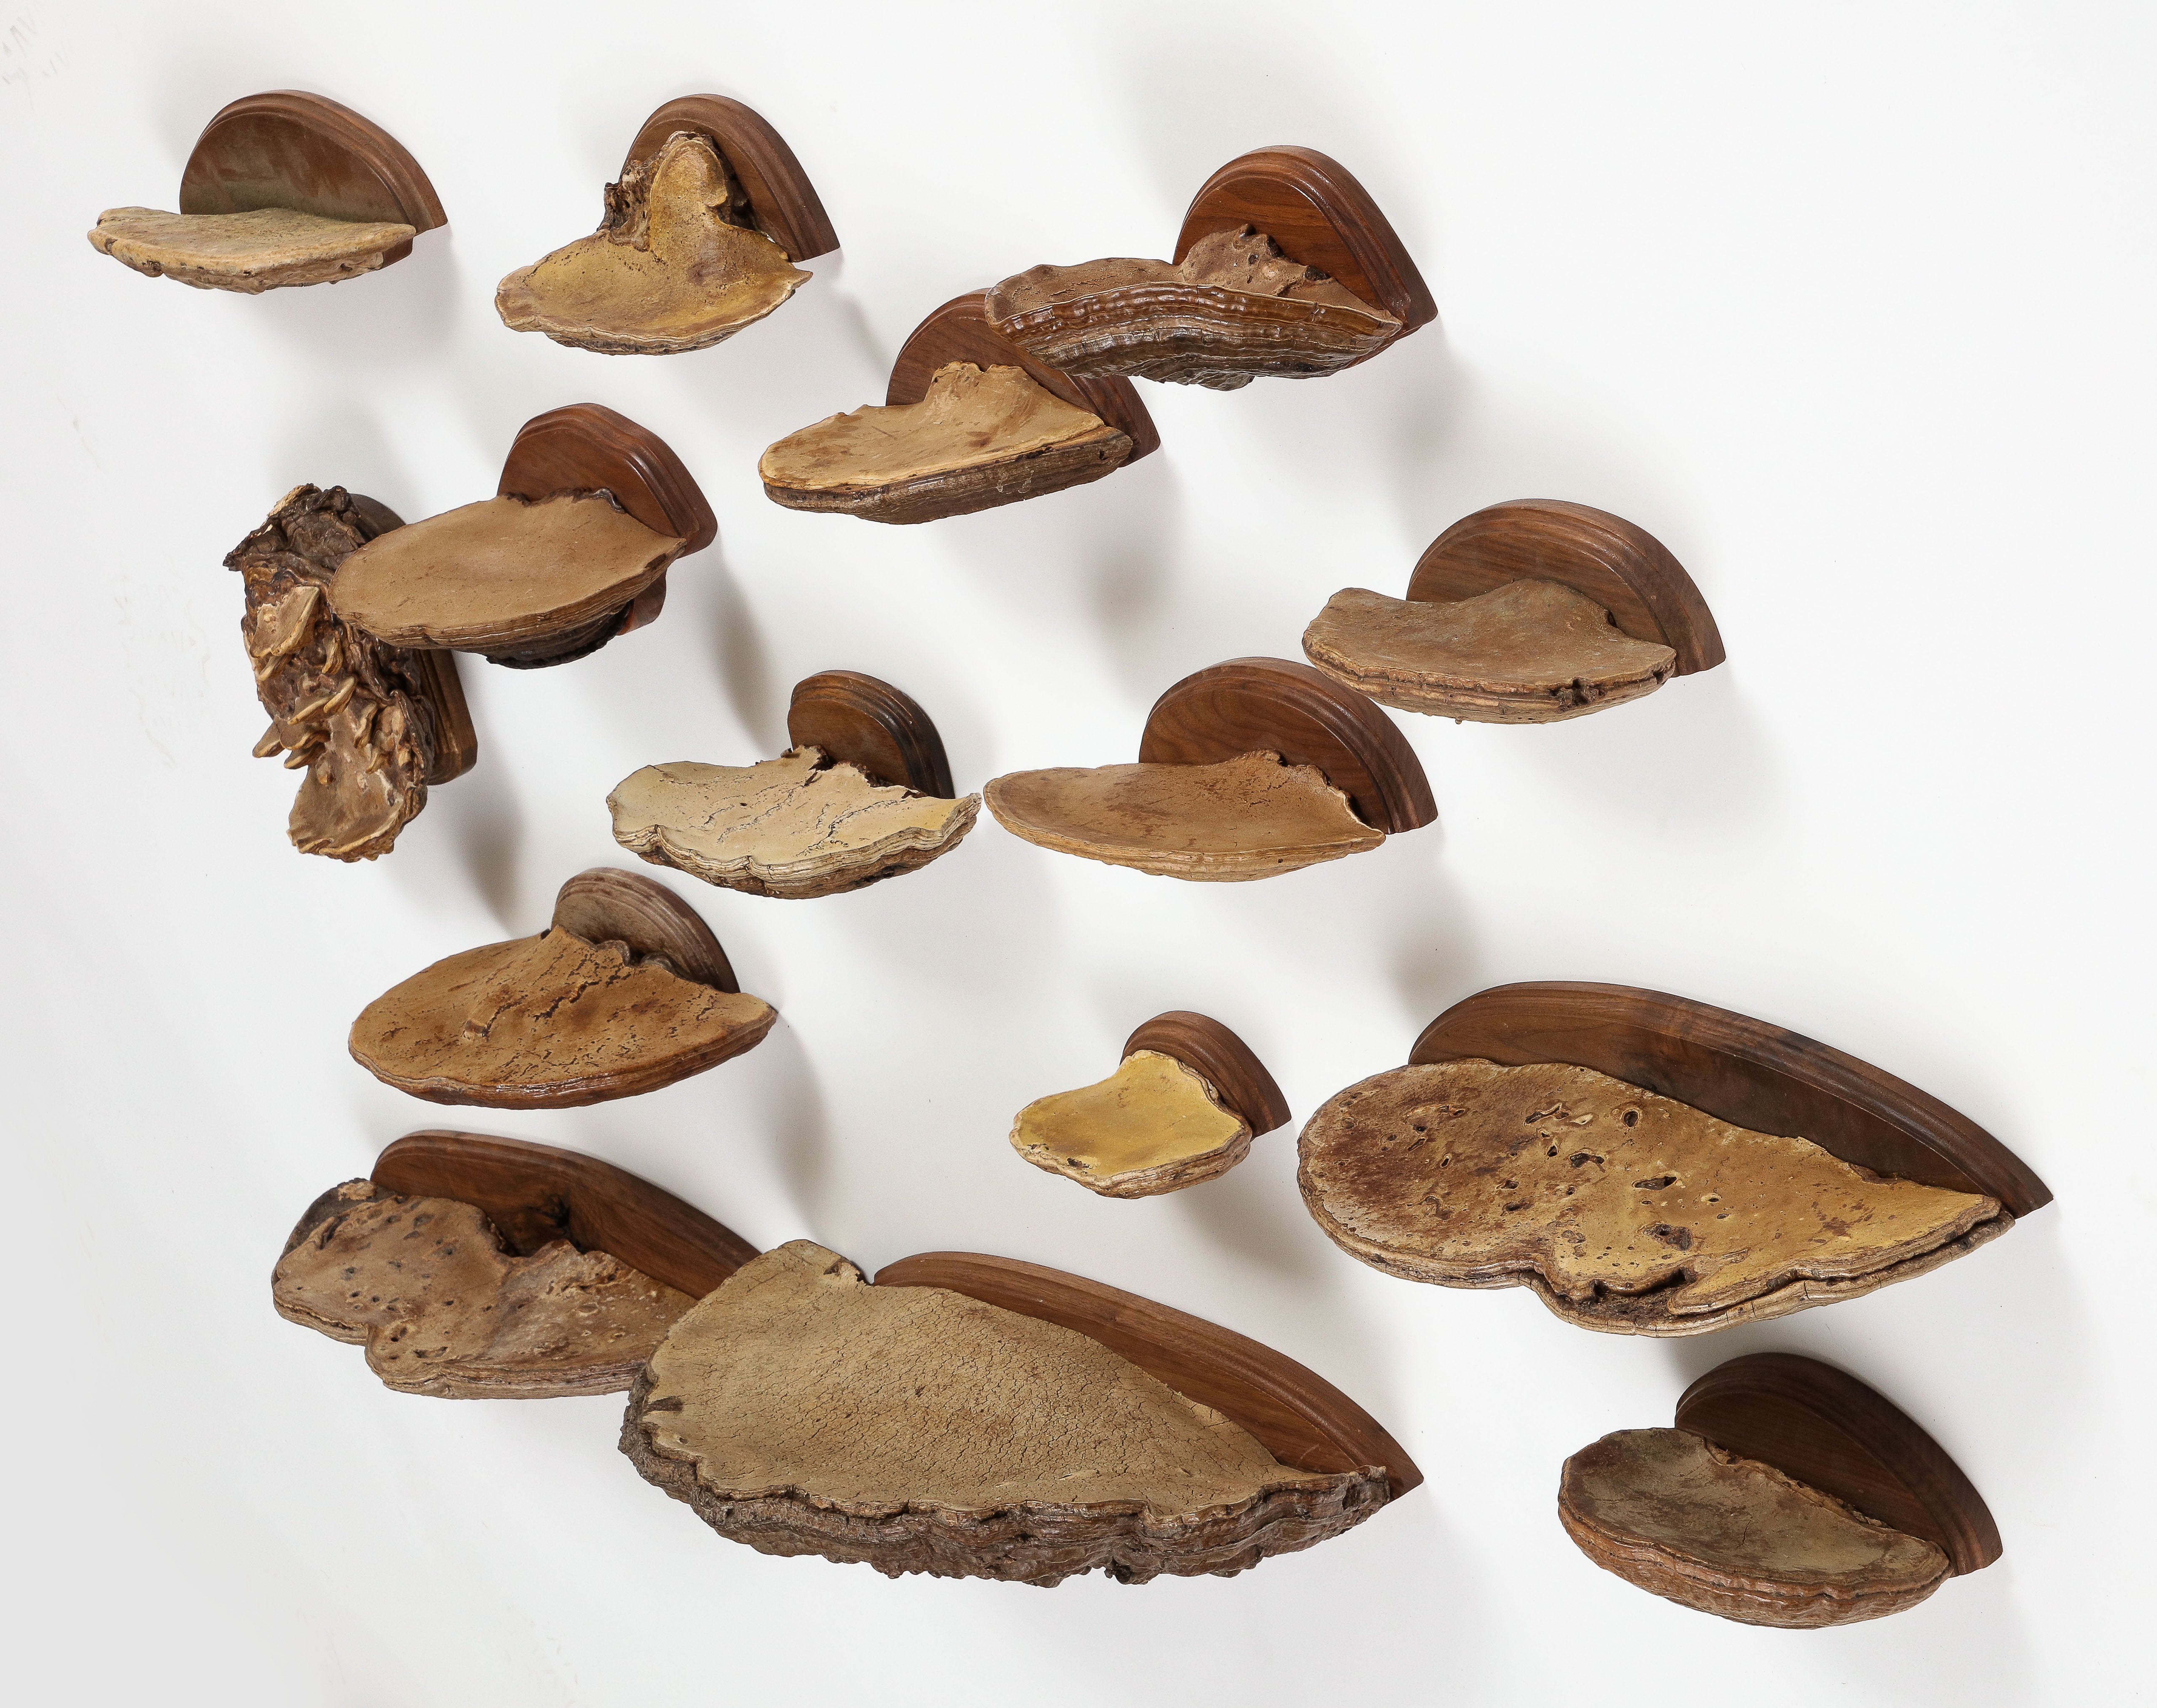 Collection of John Derian Decorative Wall-Mounted Mushrooms. Each mushroom is mounted on a wood oval with hanging hole on the back, an impressive collection to display. 15 pieces in all. 

Assorted dimensions, smallest mushroom is 3